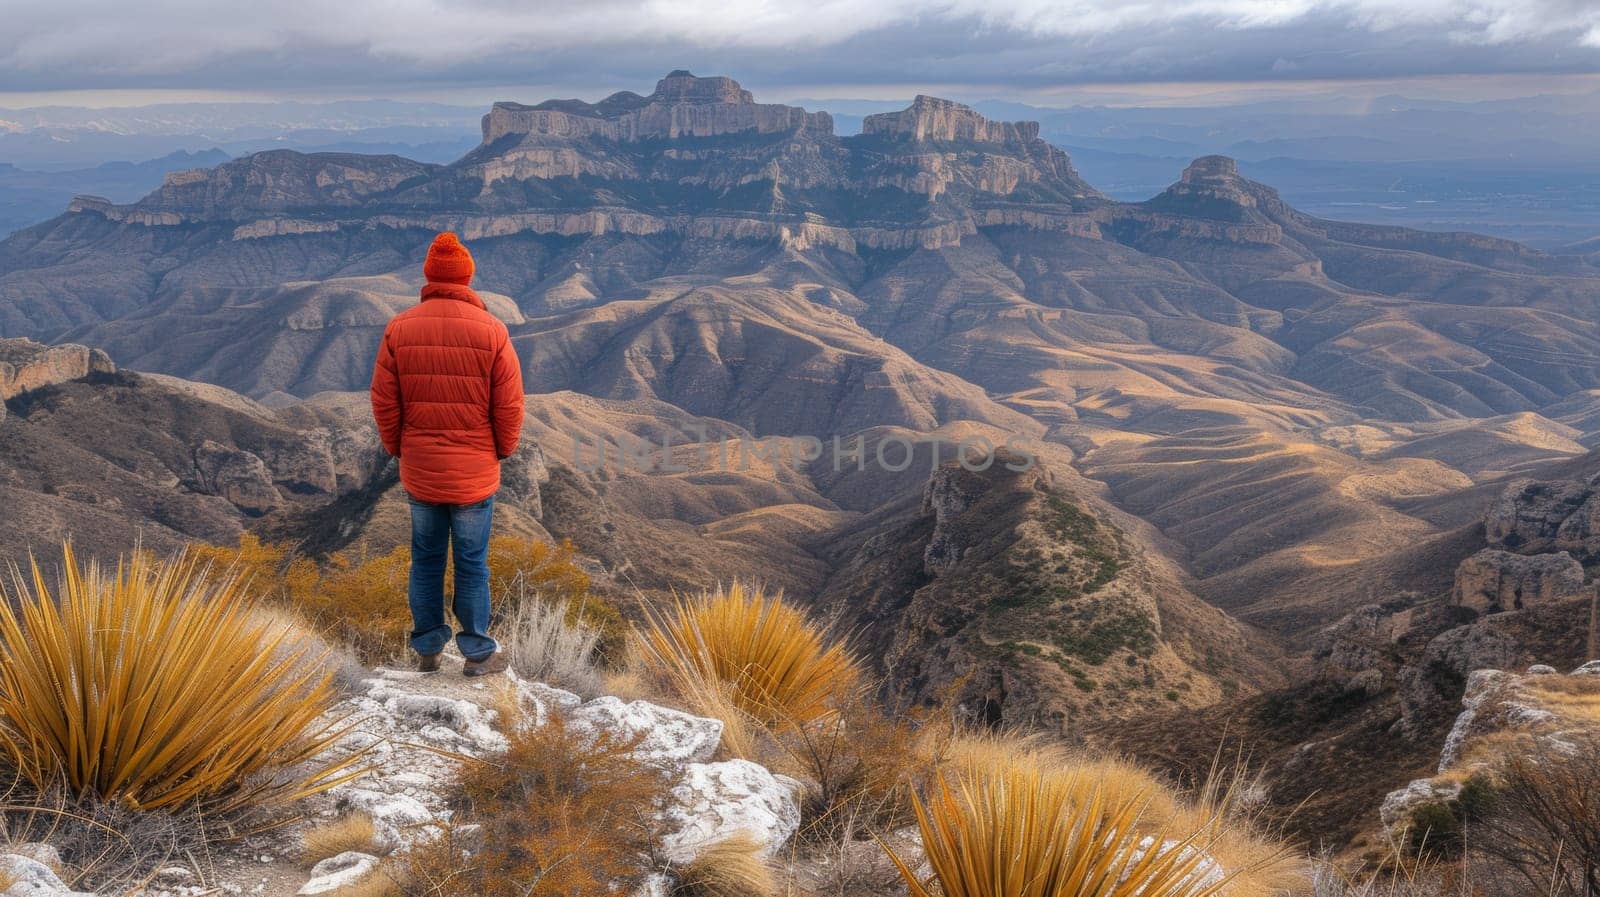 A man in red jacket standing on top of a mountain overlooking the desert